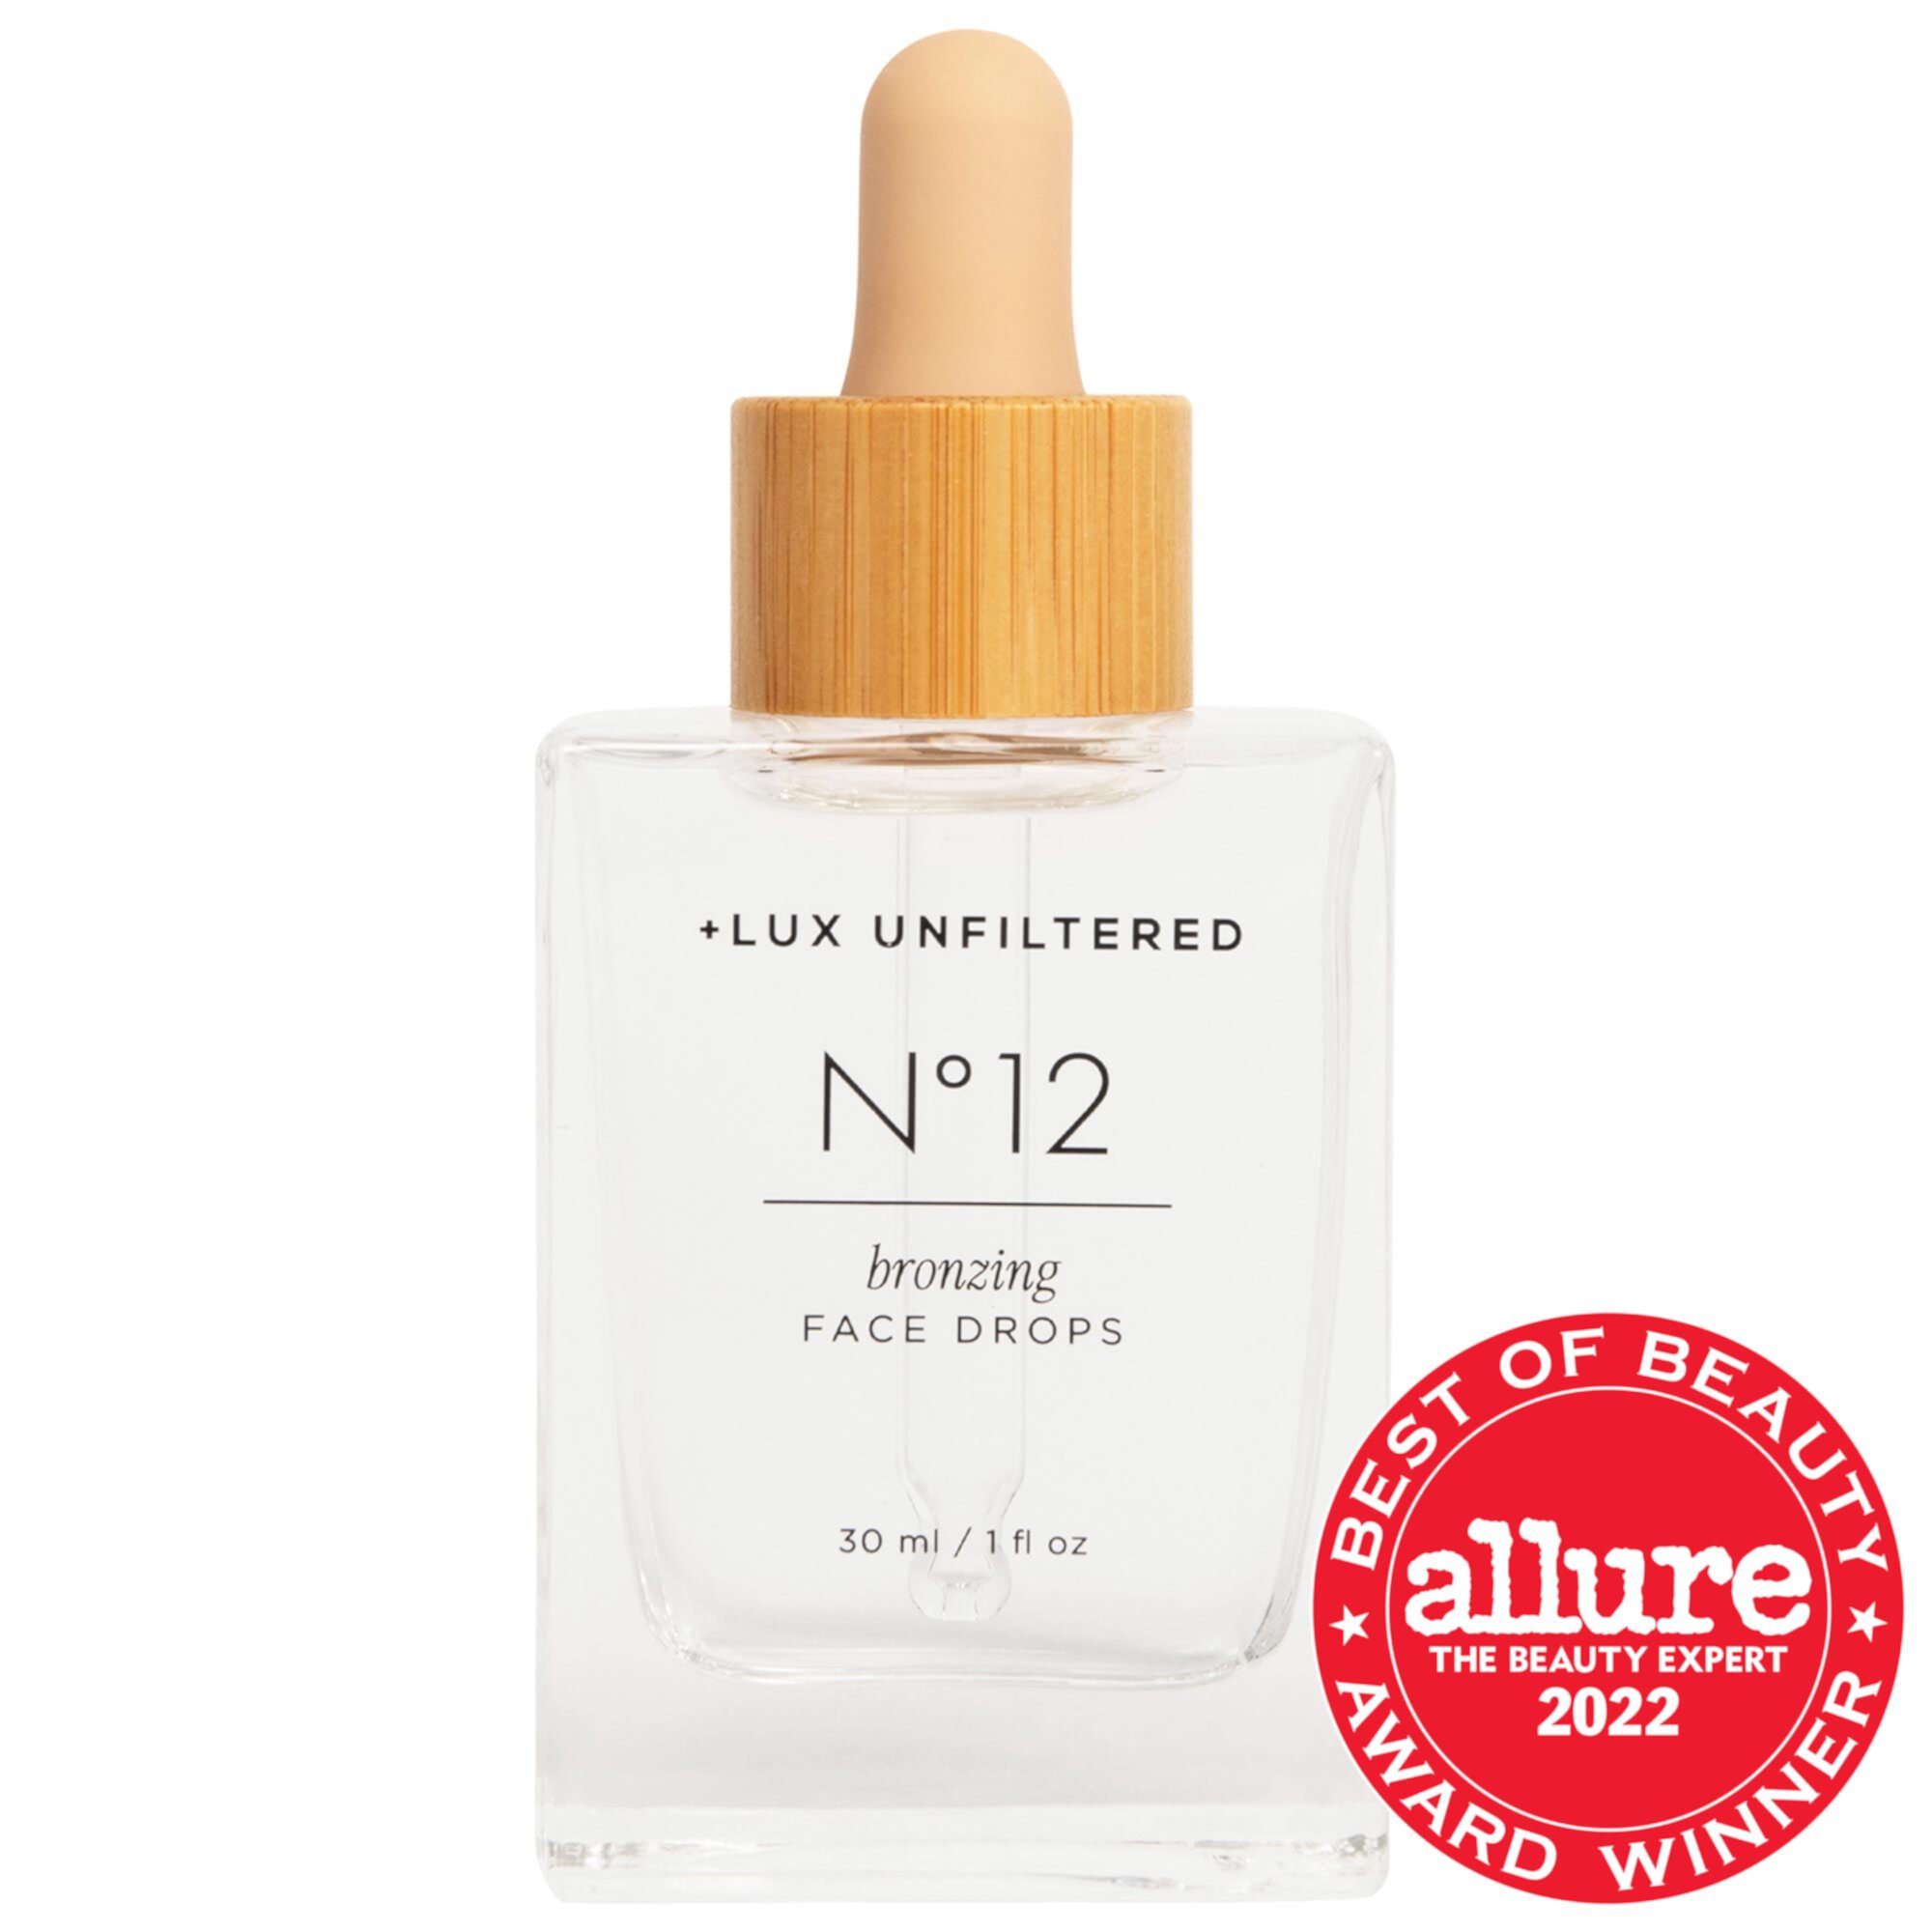 N°12 Self Tanning Face Drops Lux Unfiltered